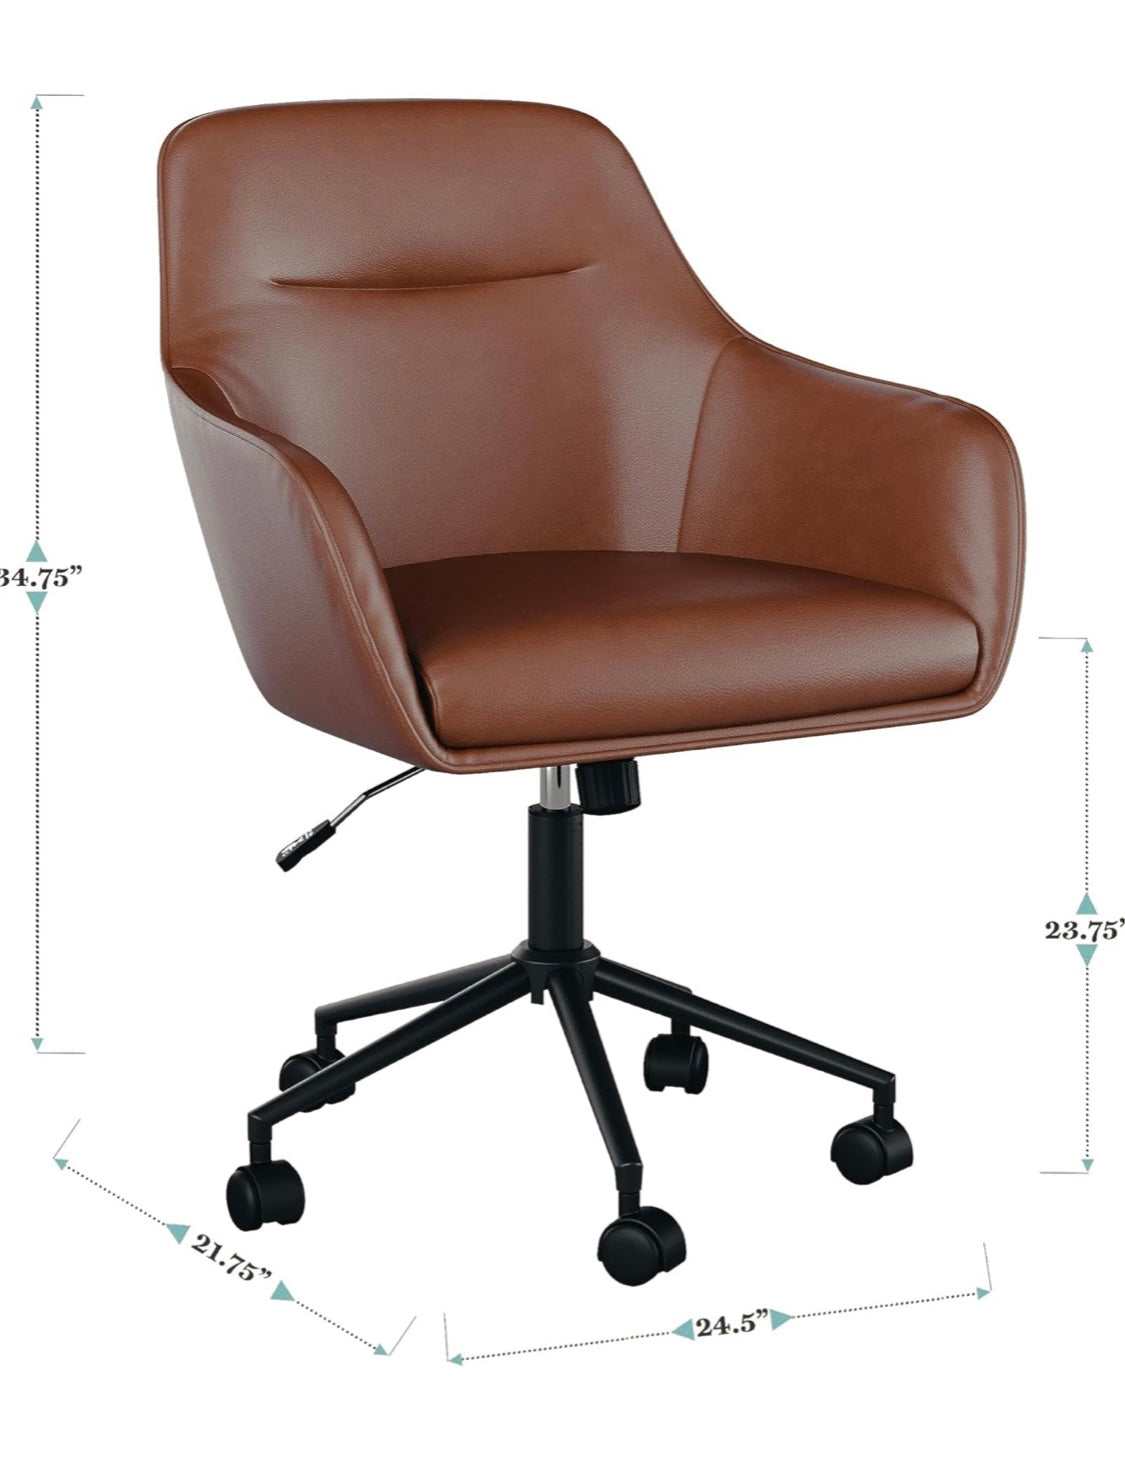 Martha Stewart Rayna Office Chair in Saddle Brown